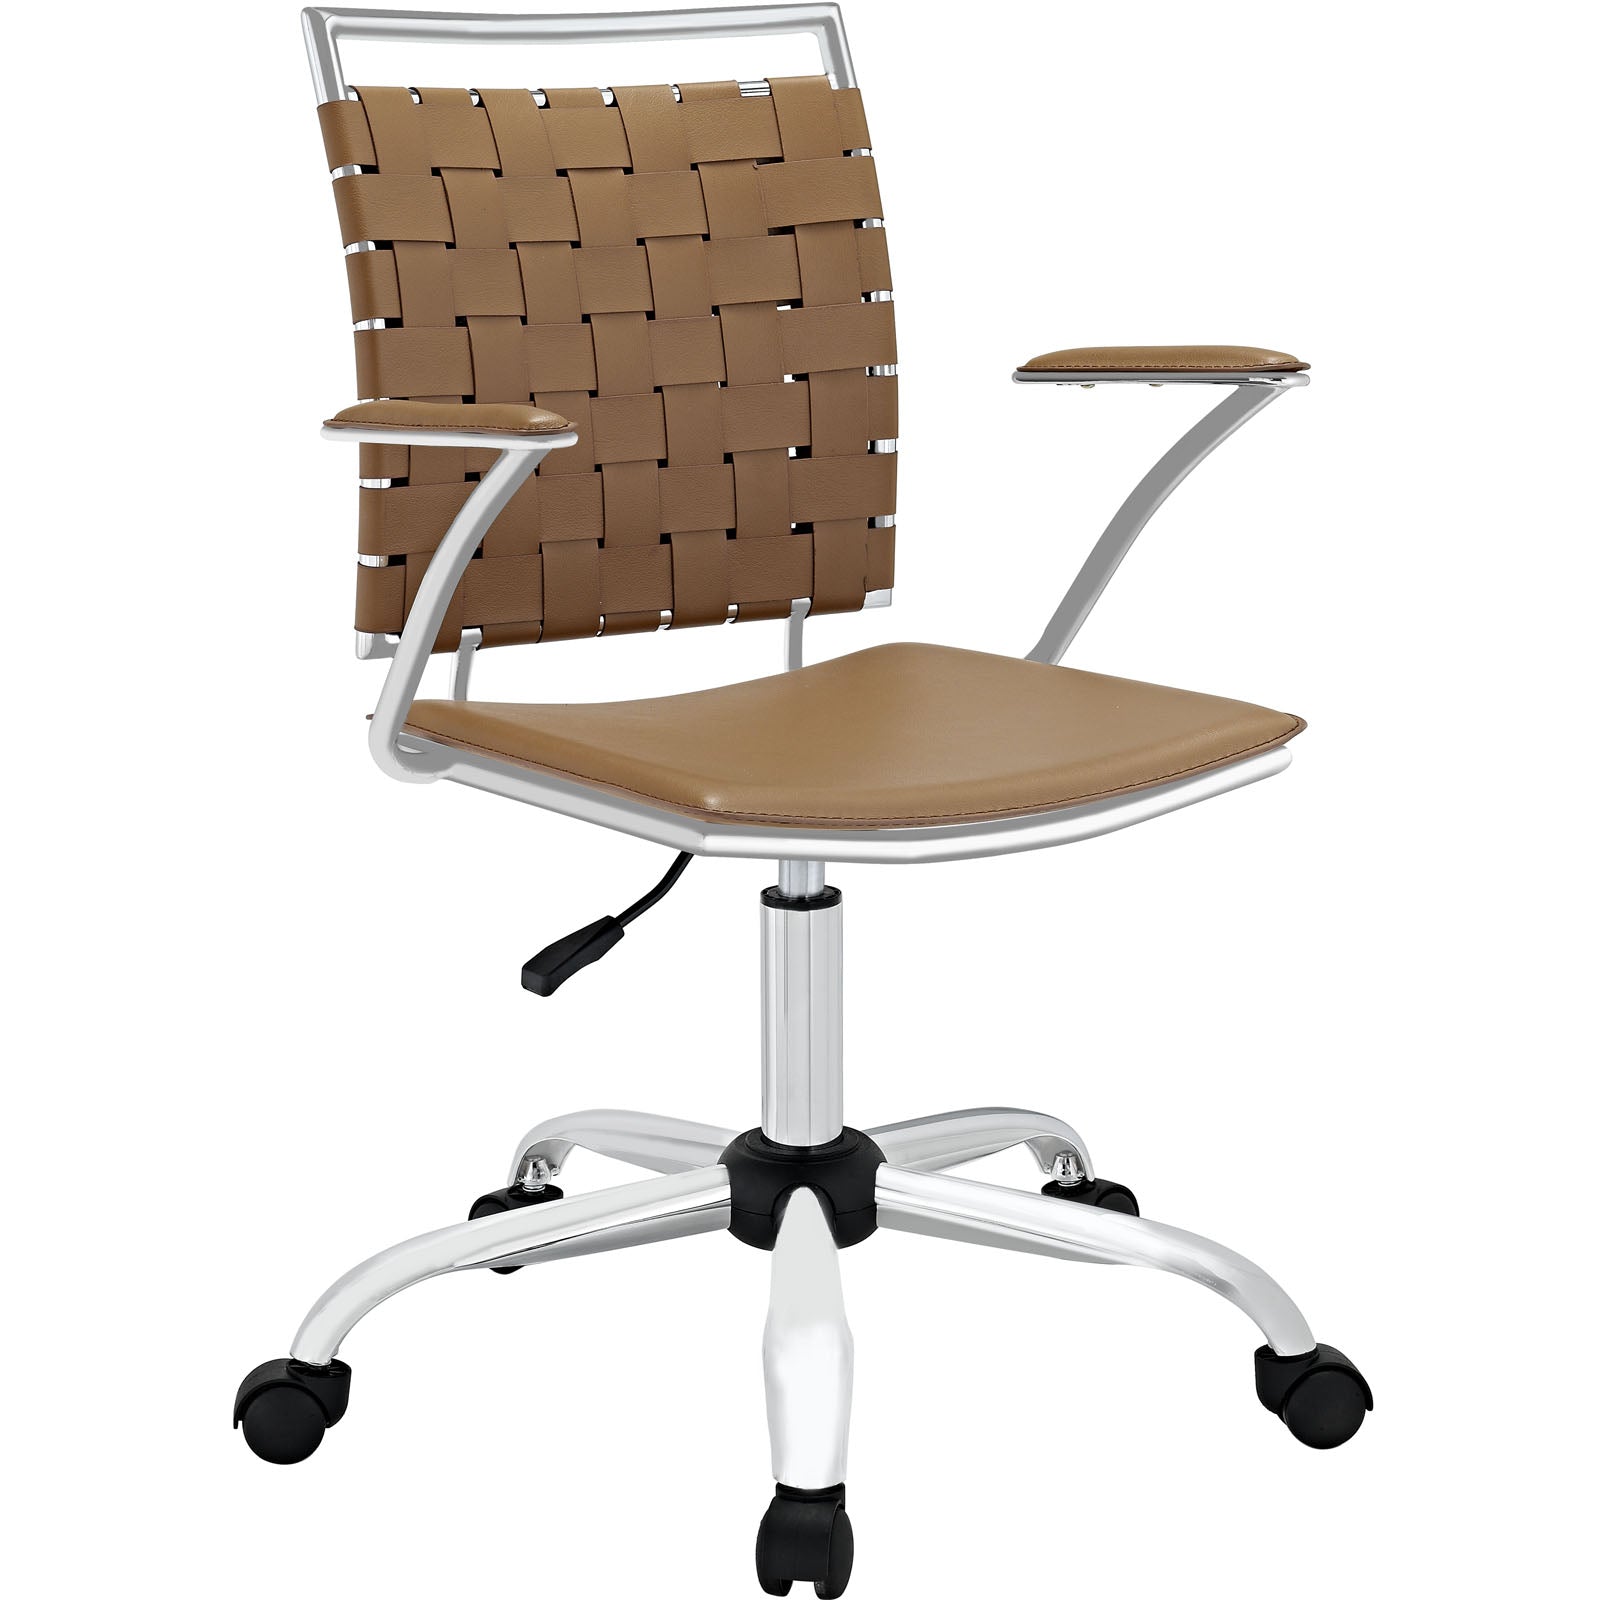 Fuse Faux Leather Office Chair - Tan